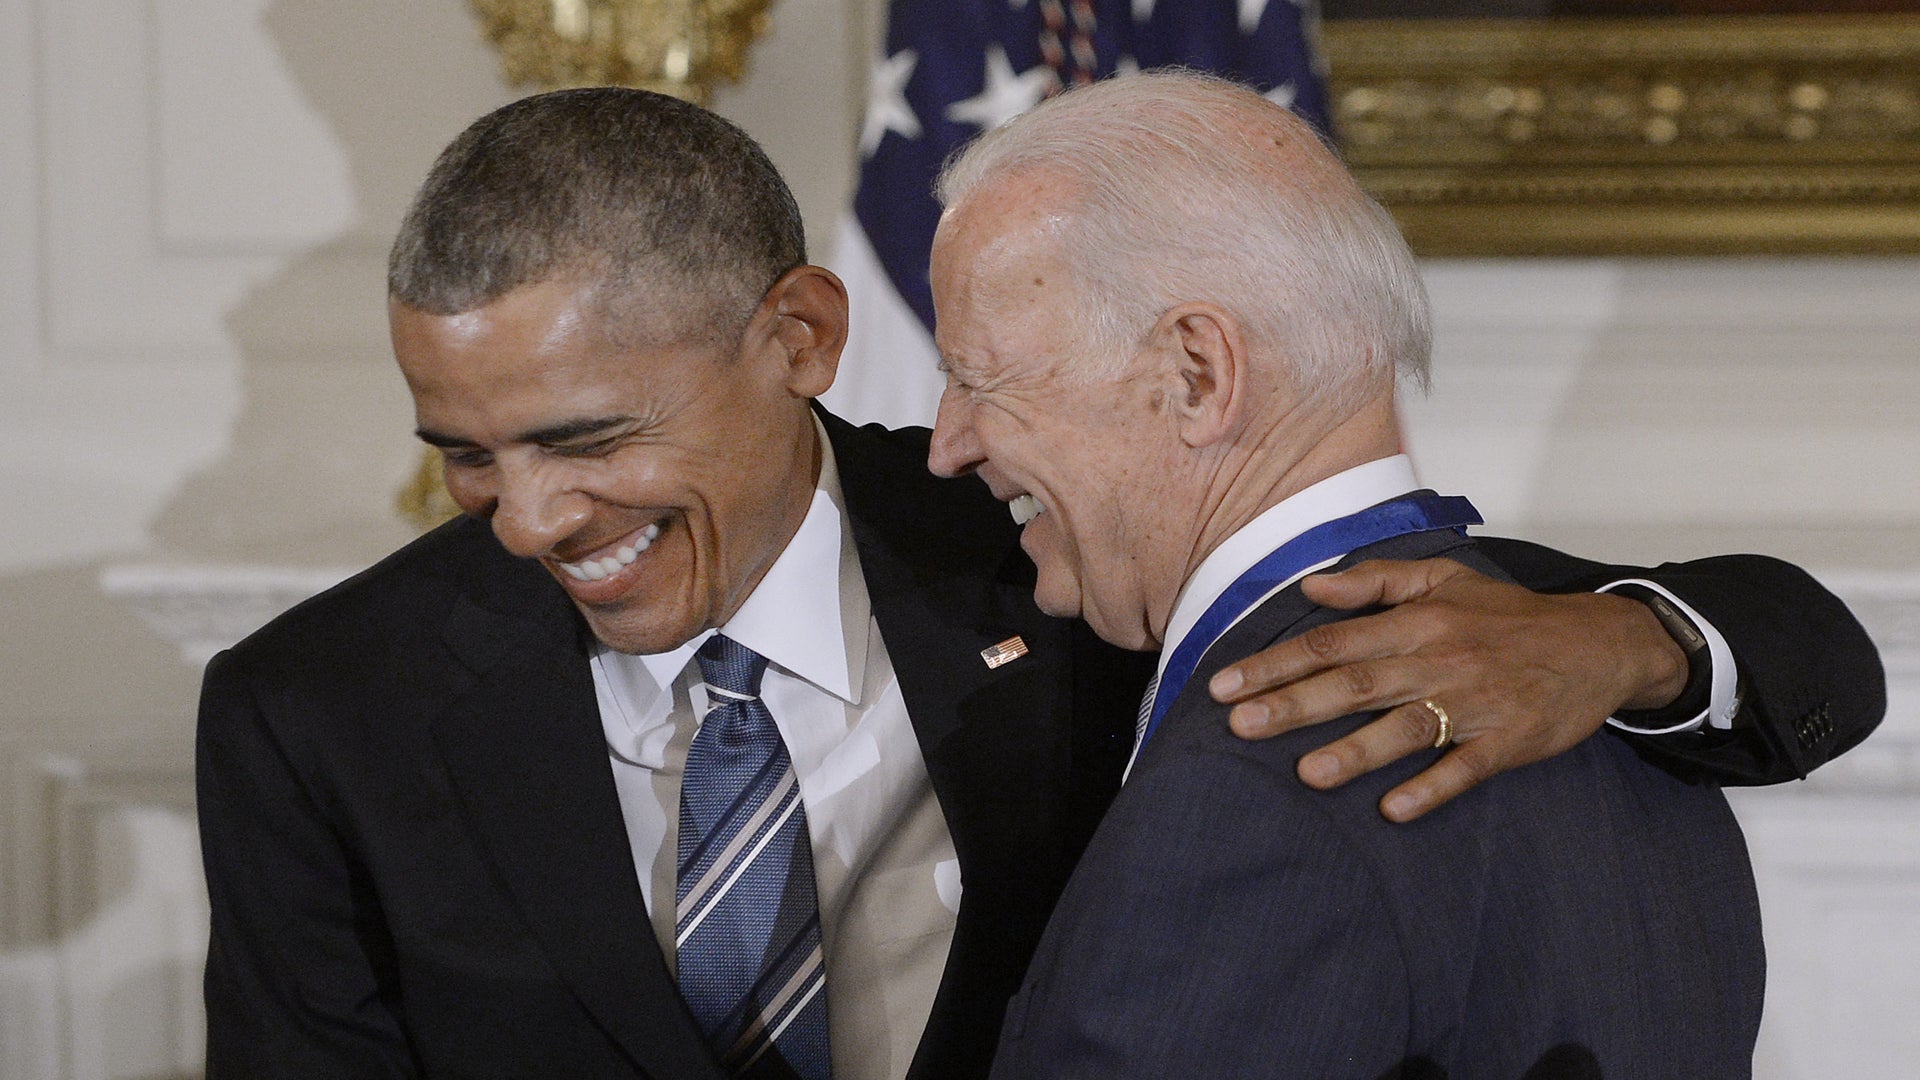 Obama, Biden Reunite To Chop It Up About Leadership And Trump’s Lack Thereof